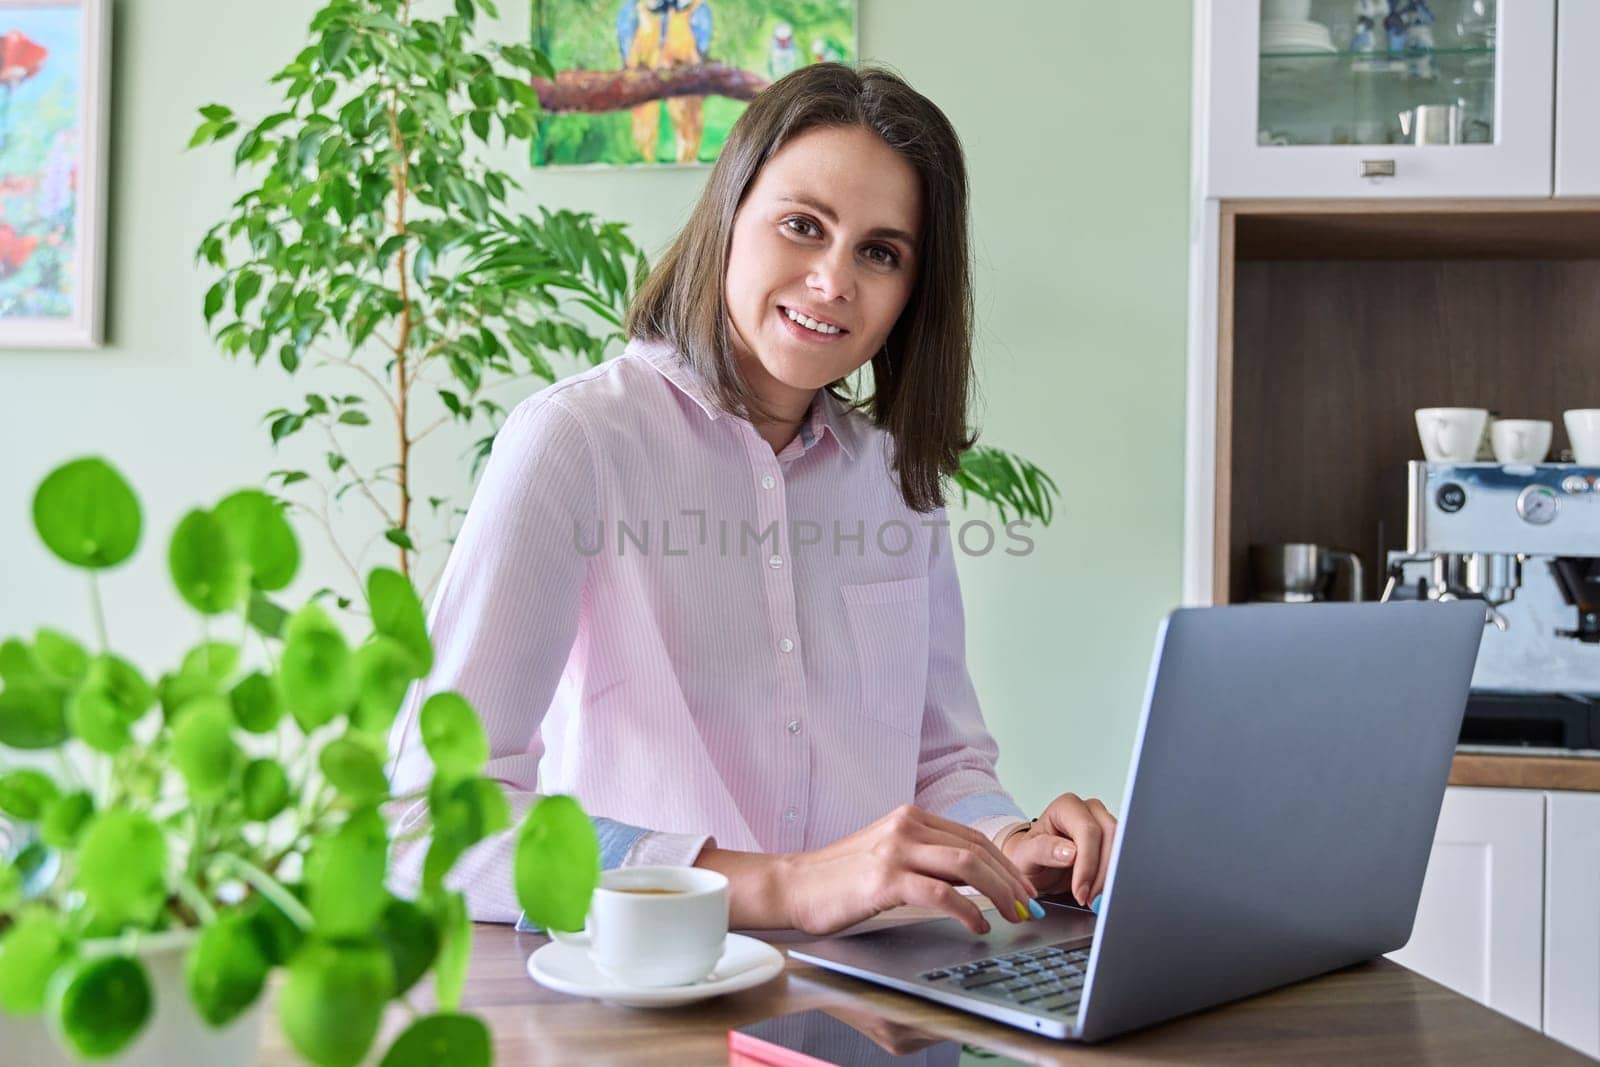 Smiling attractive young woman working at home using laptop, looking at camera. Lifestyle, freelancing, technology, job, work, leisure, people concept